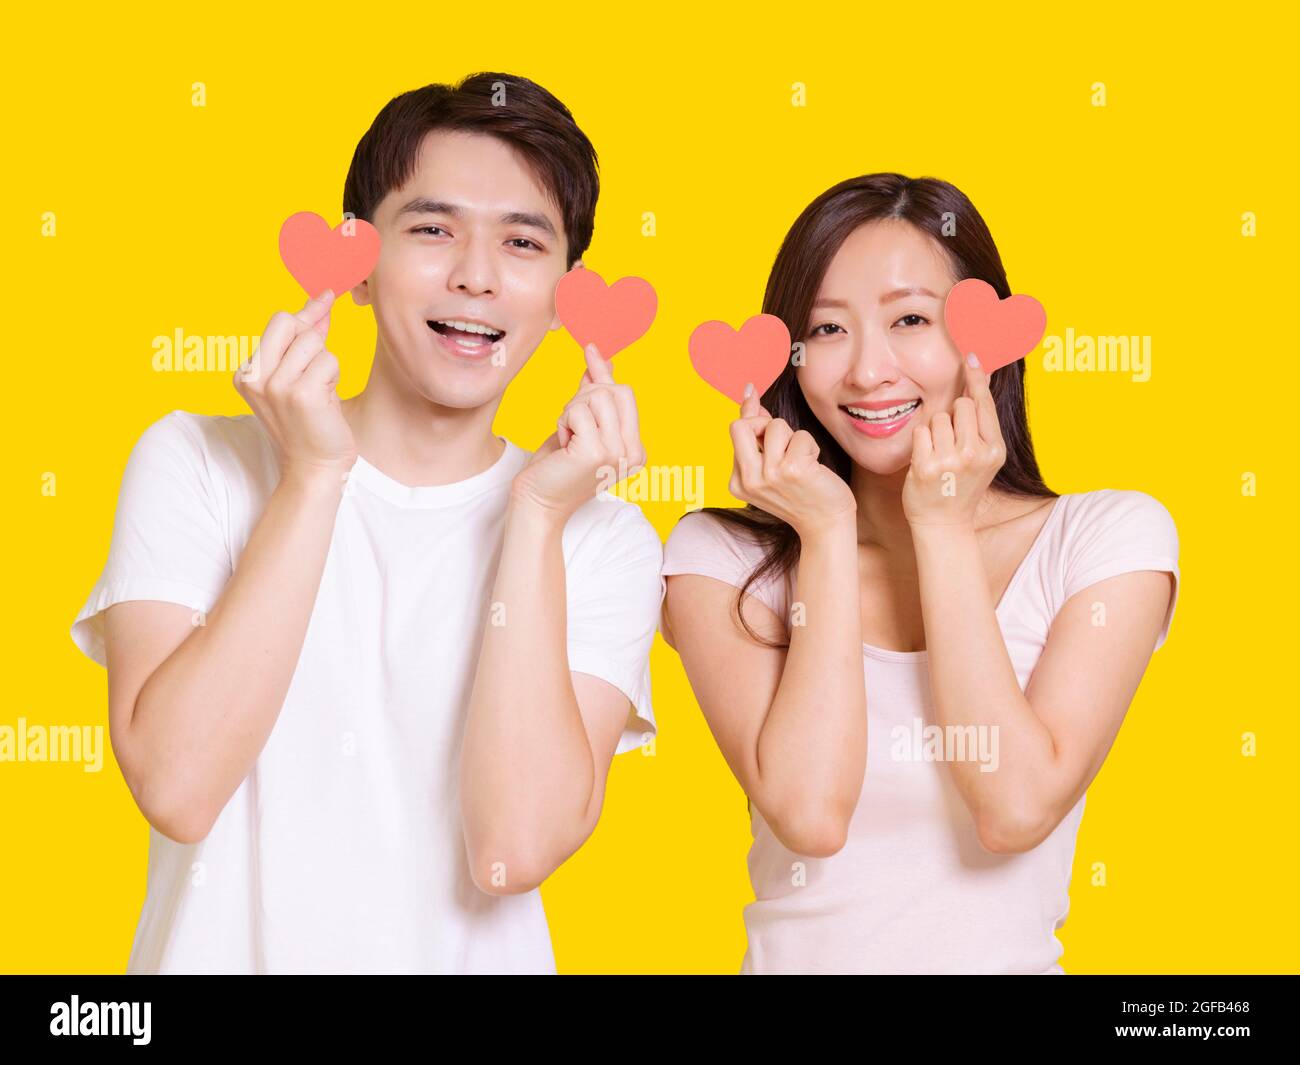 Young couple showing red hearts shape .Isolated on yellow background. Stock Photo